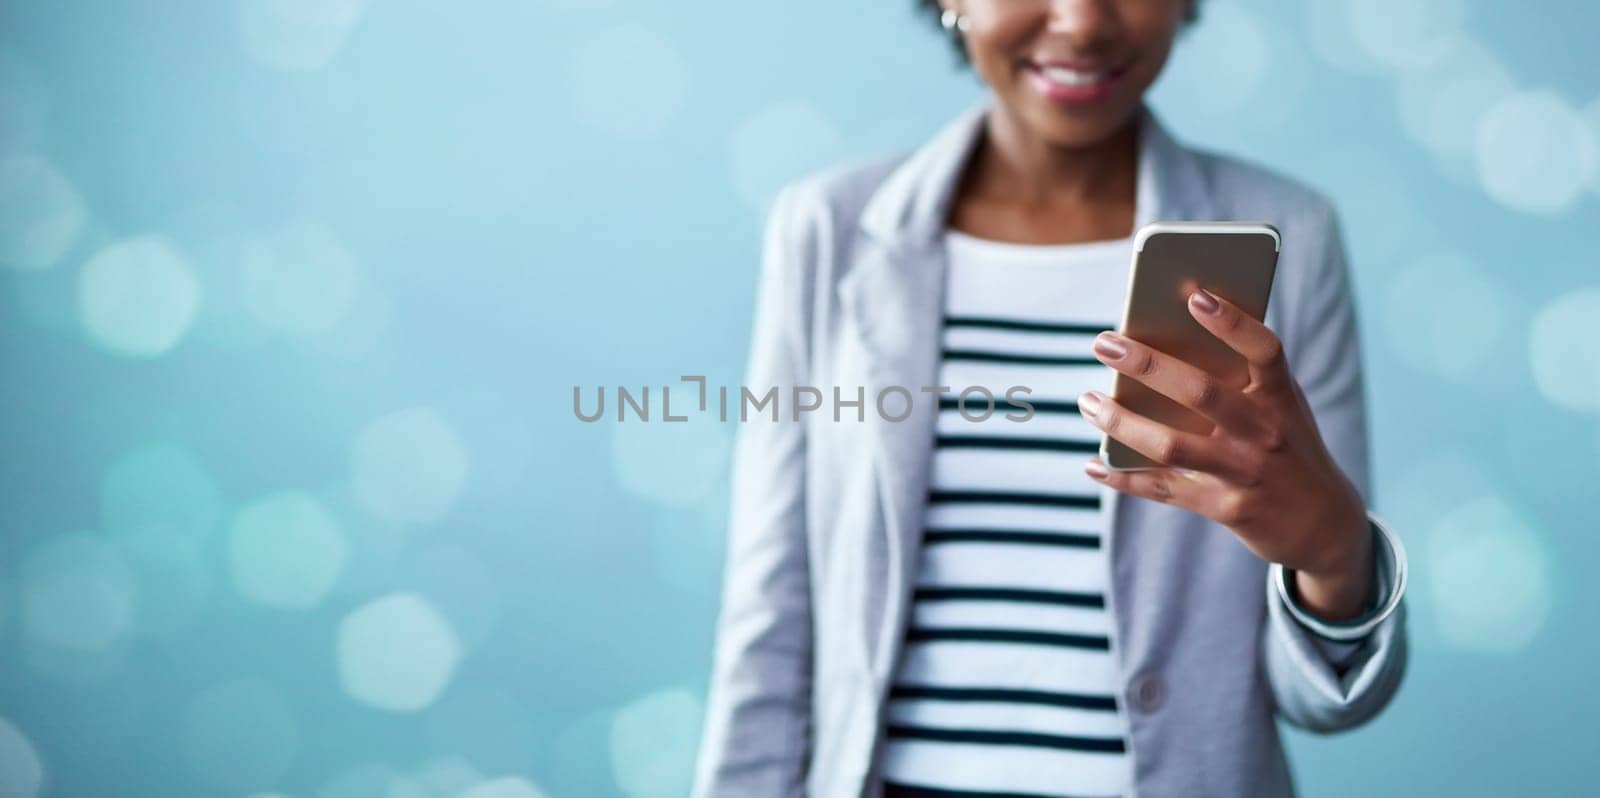 Make contact and make it happen. Cropped studio shot of a young businesswoman using a mobile phone against a blue background. by YuriArcurs